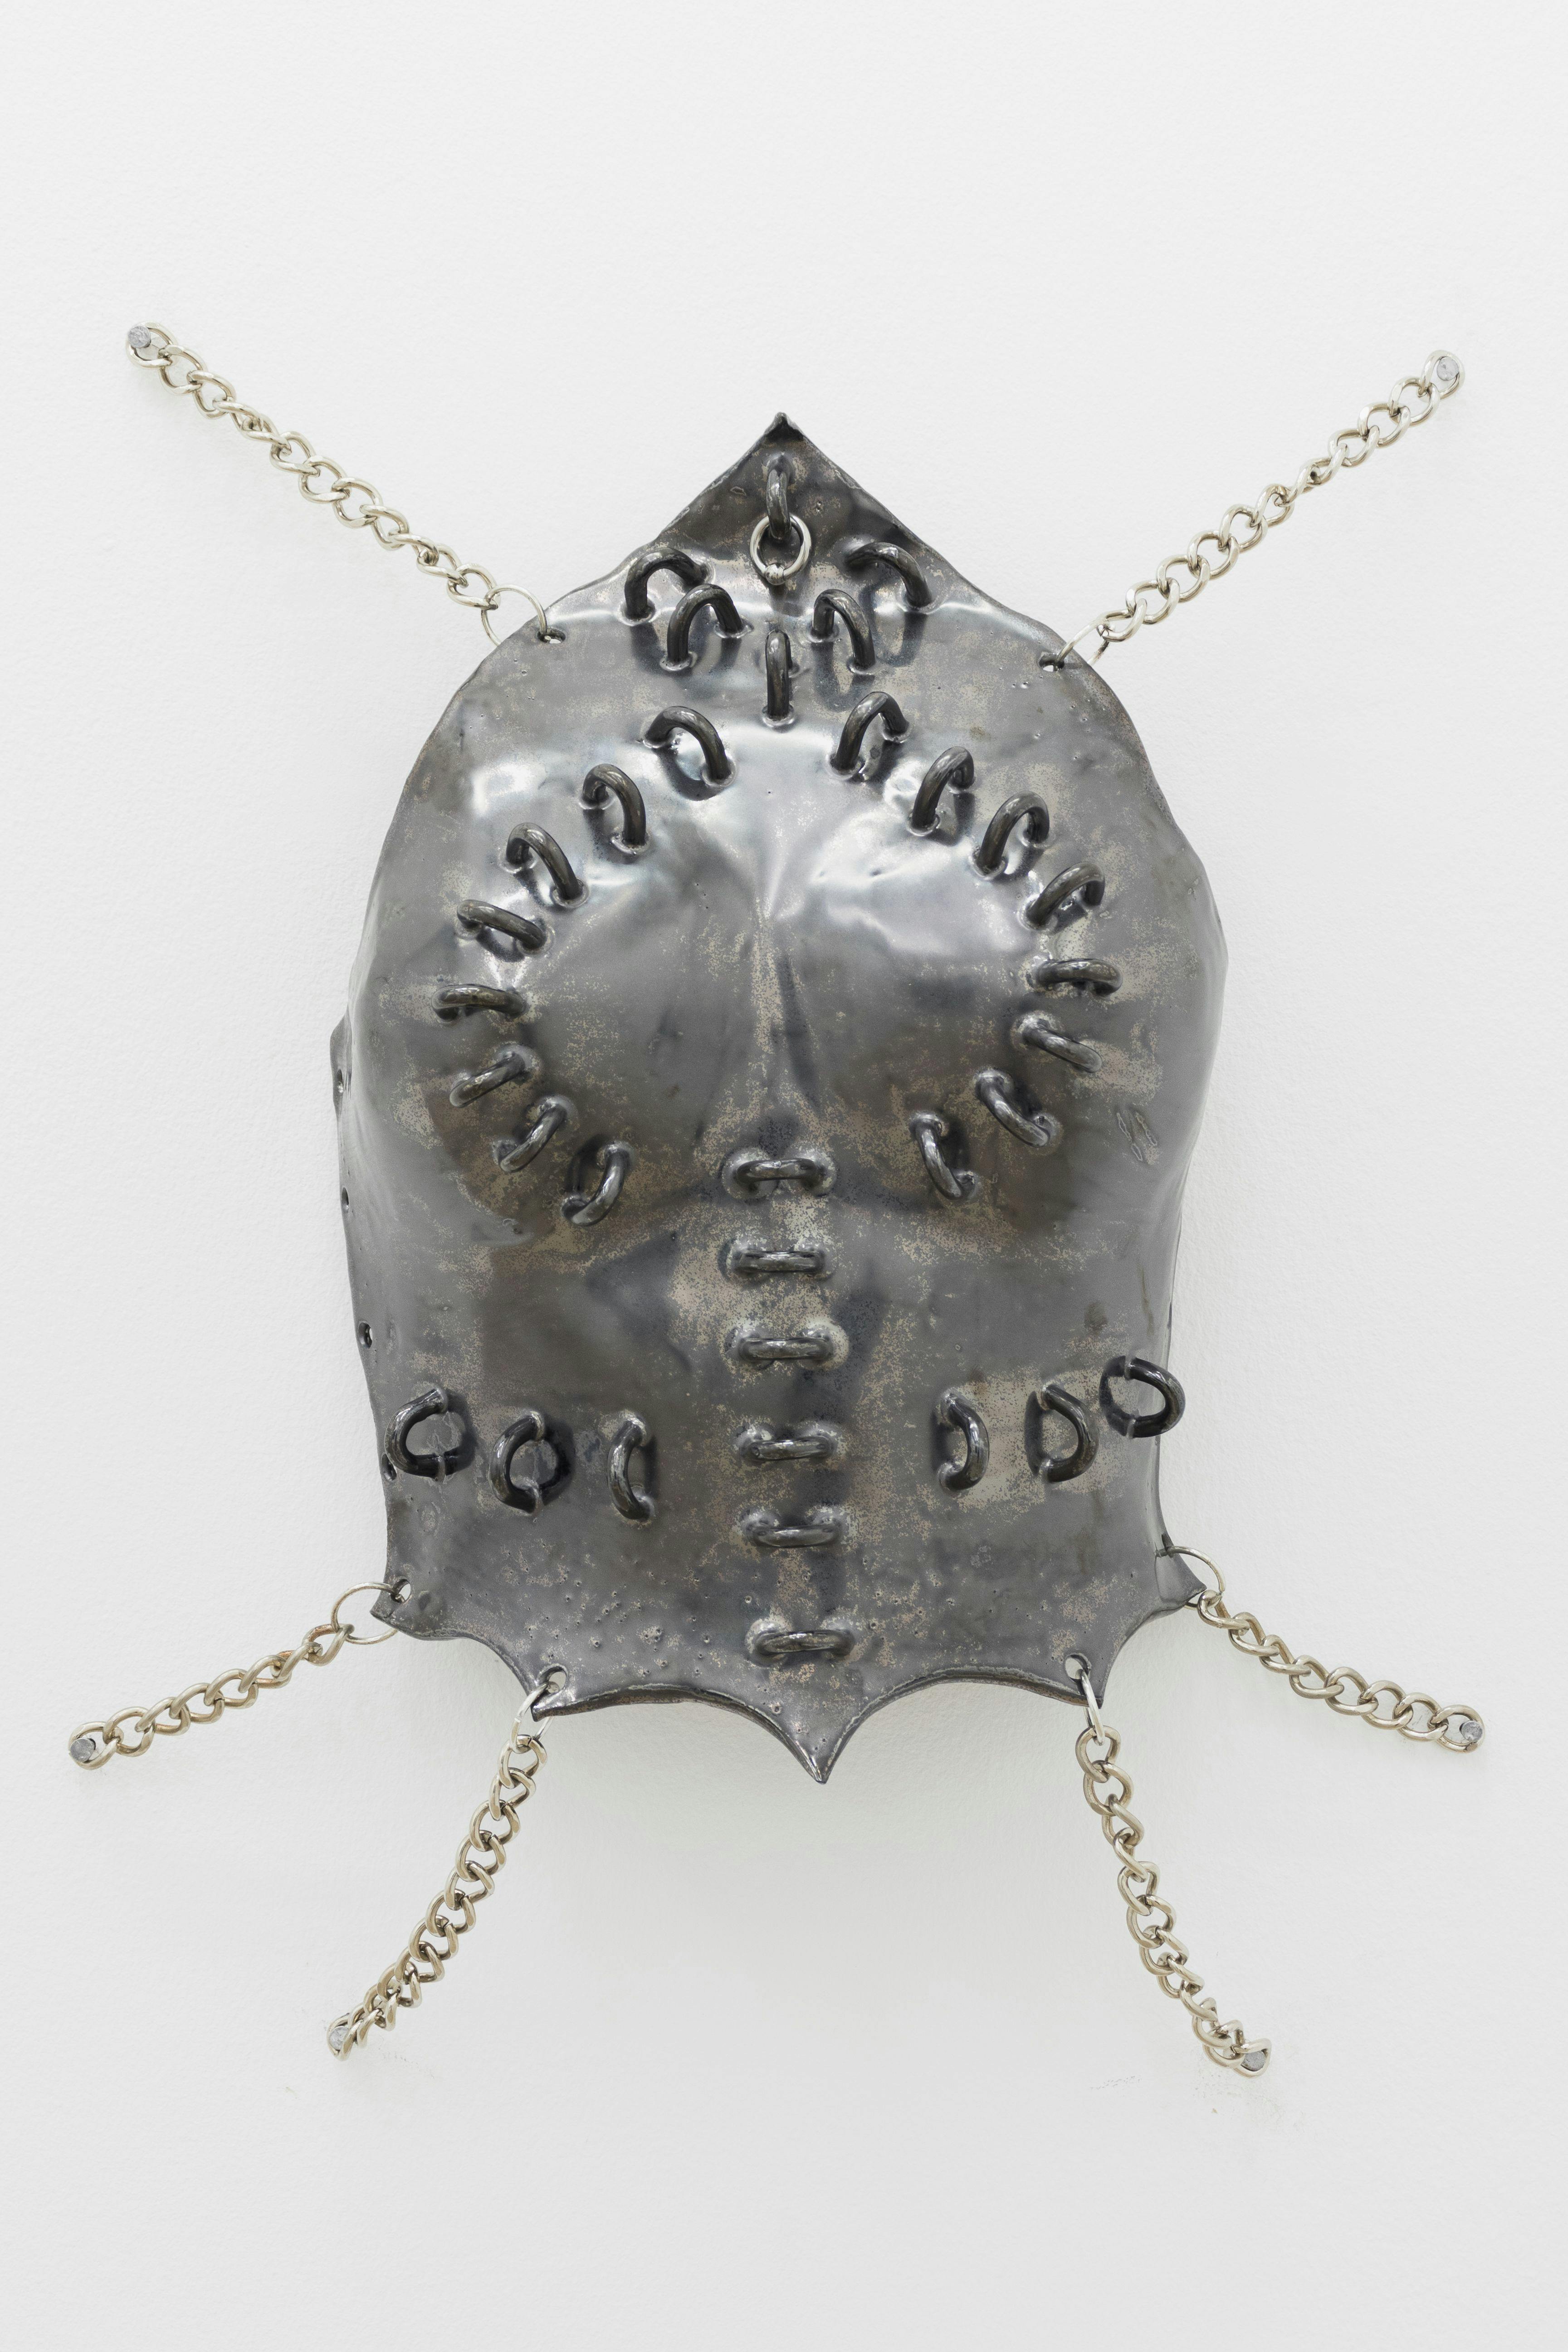 Breastplate 1, 2023

glazed stoneware, stainless steel jewelry

18 x 15 x 5 inches